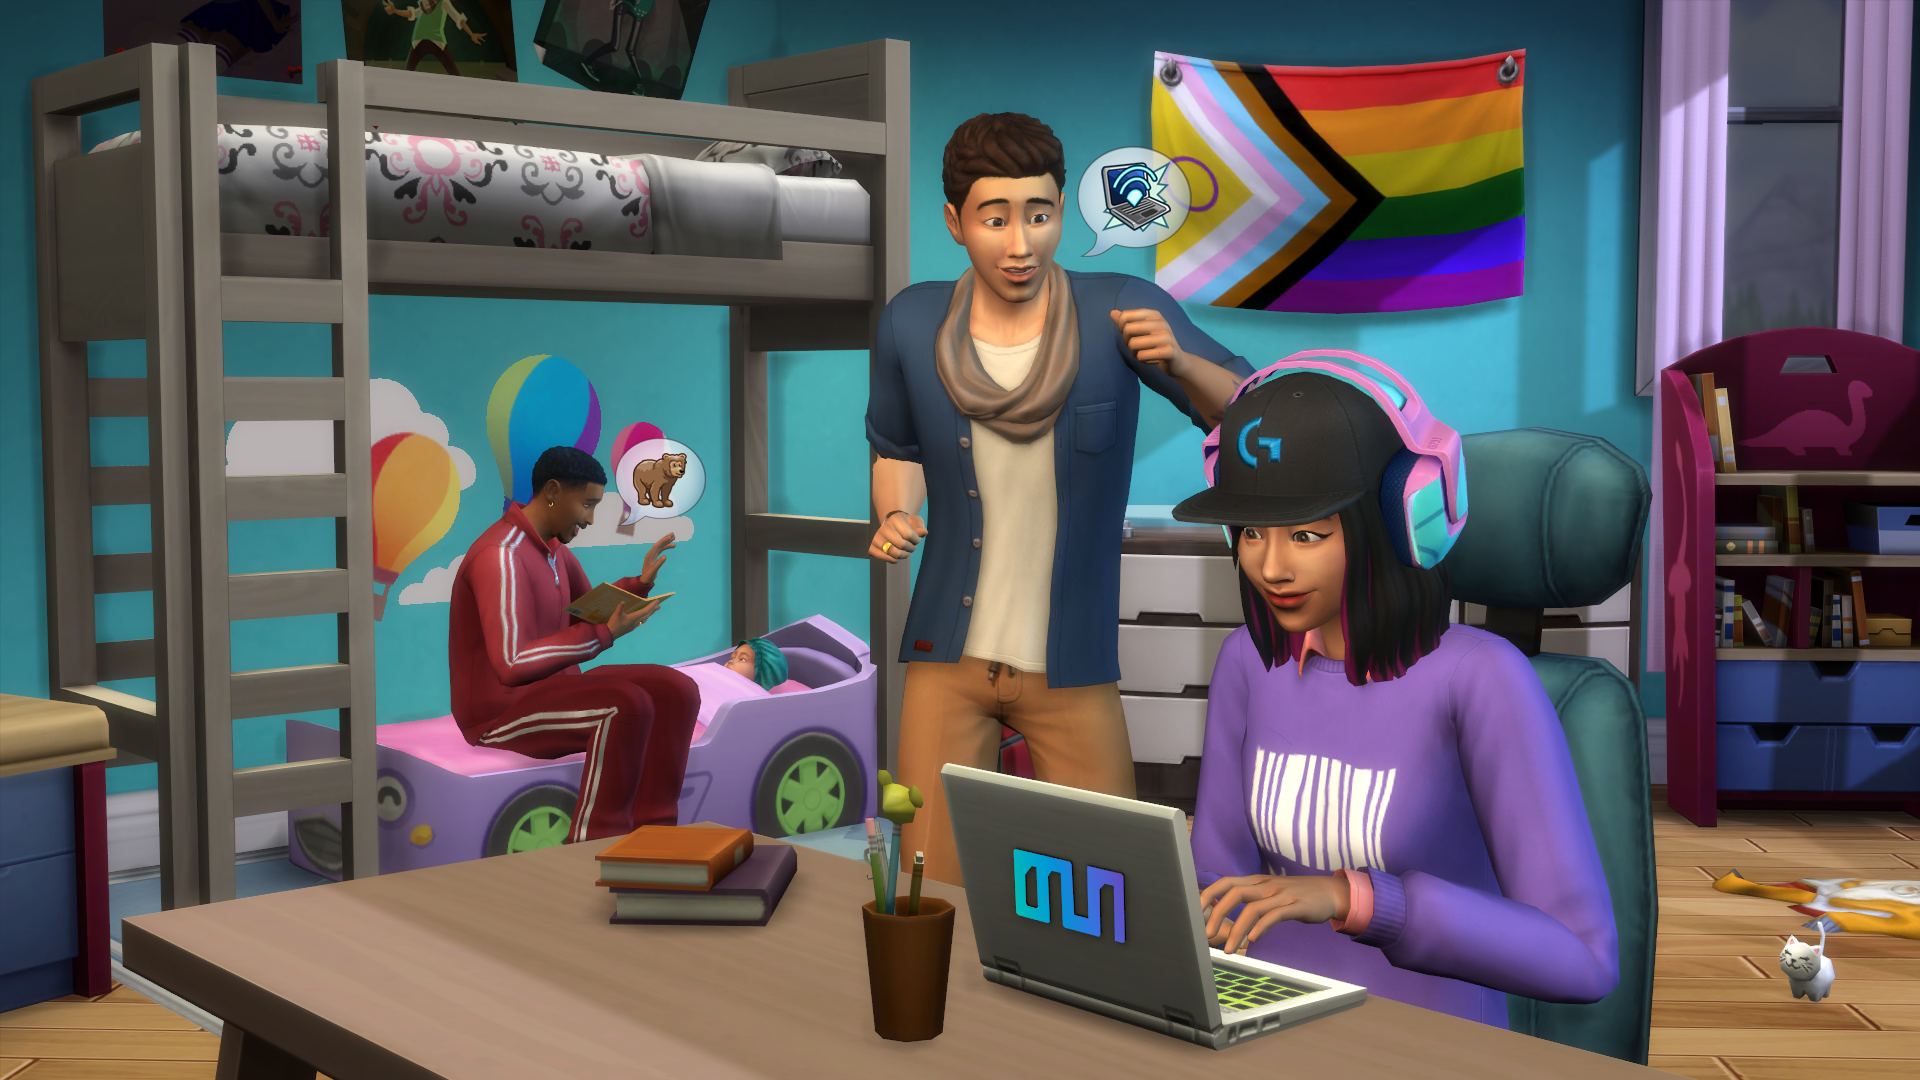 Sims Delivery Express 7.0.2 June 8, 2022 - Logitech G733 Headset, Pride Flags and Proud Parent Scenario